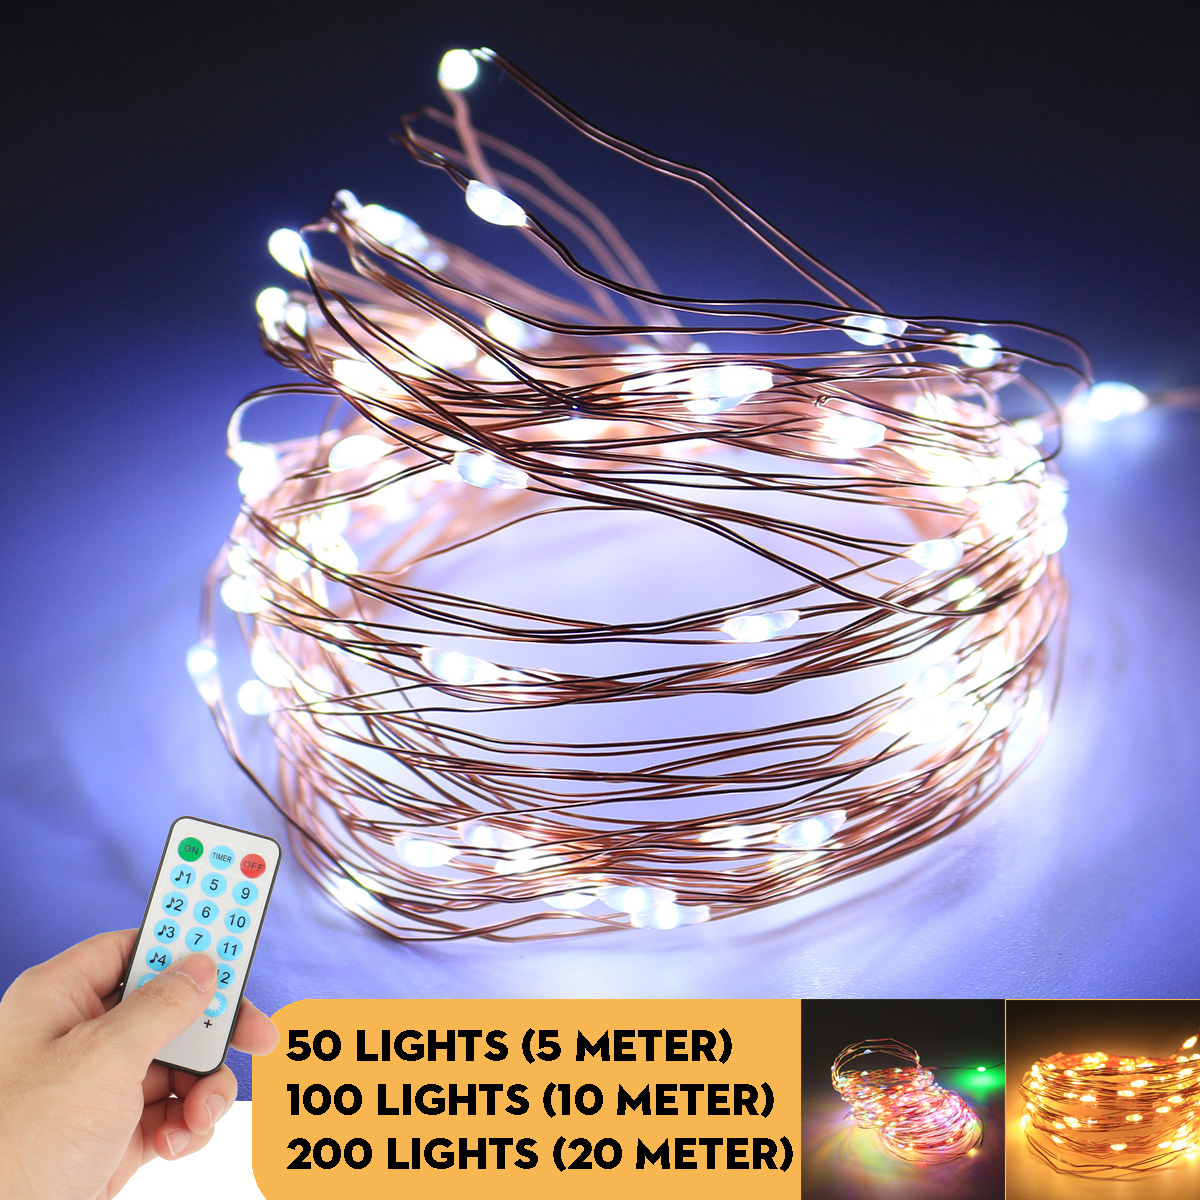 5M10M20M-USB-LED-String-Light-8-Modes-Waterproof-Fairy-Lamp-Party-Garden-Christmas-Tree-Decoration-1739365-2